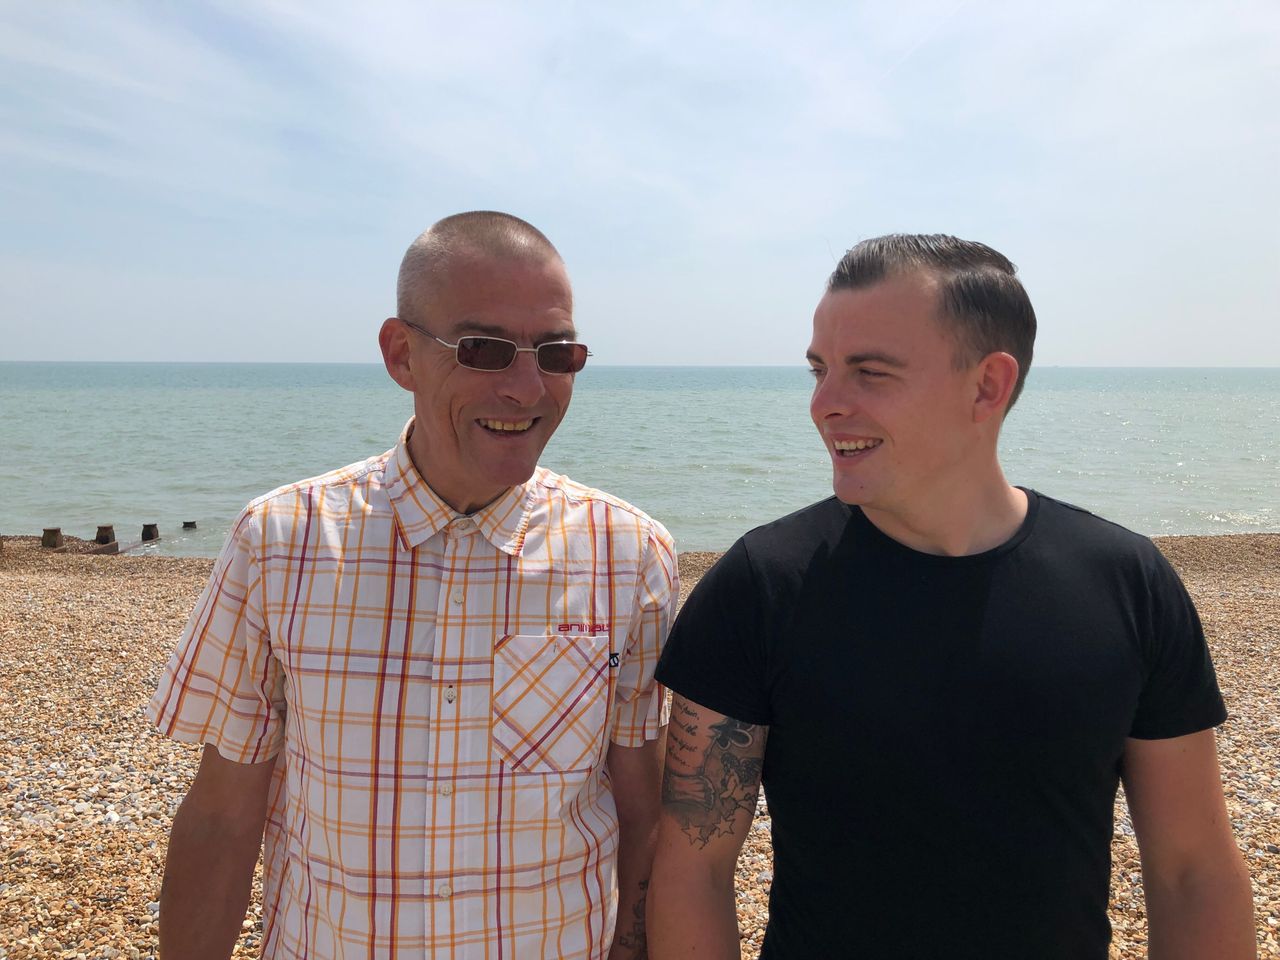 The father and son are now living in a privately rented flat but often return to the beach they used to live on.